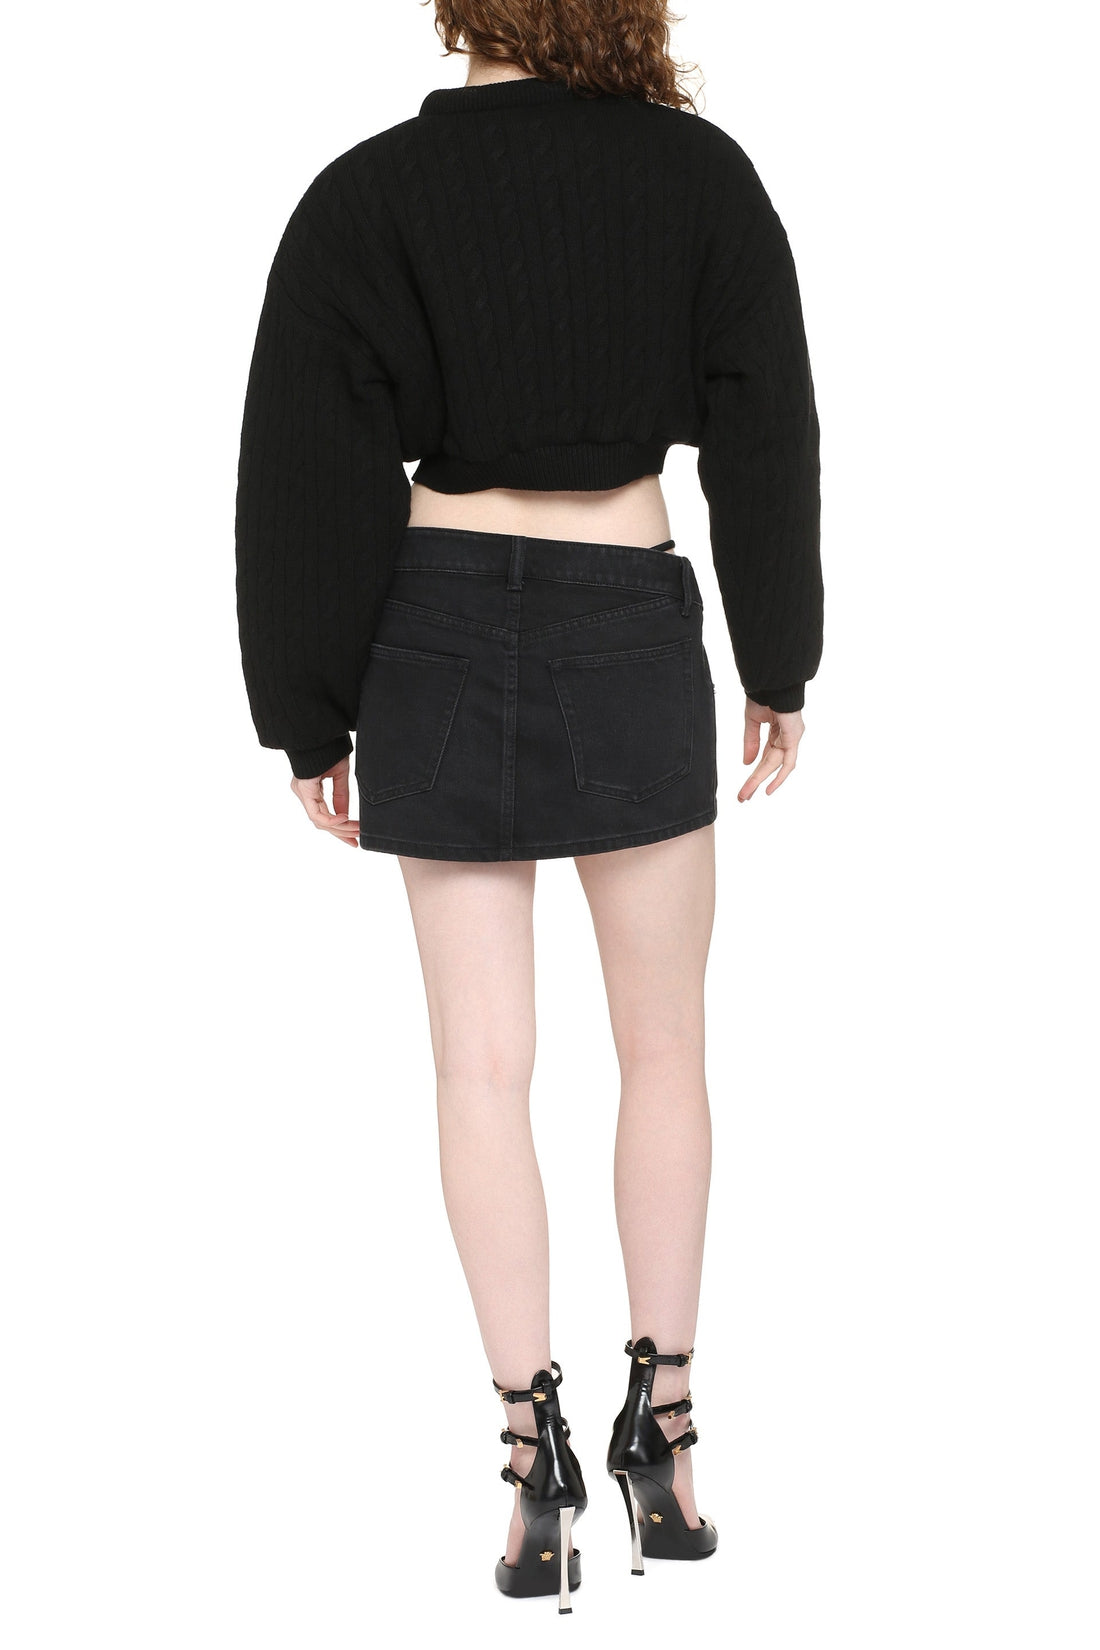 Alexander Wang-OUTLET-SALE-Cropped-length knitted cardigan-ARCHIVIST